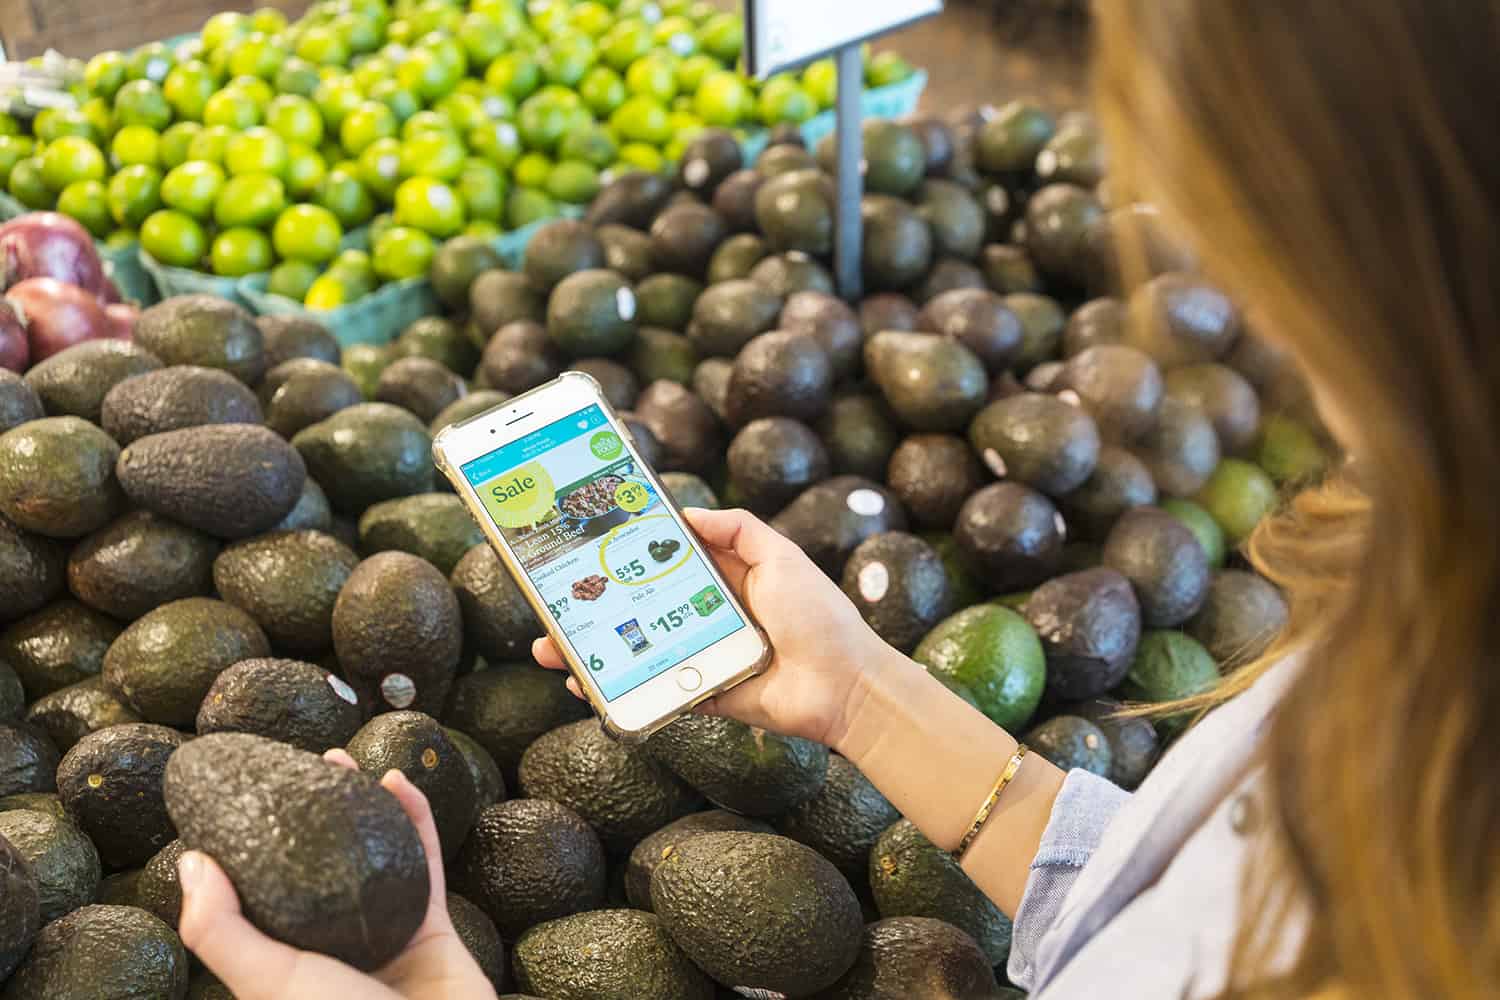 Shopping Smarter At The Grocery Store With Flipp App